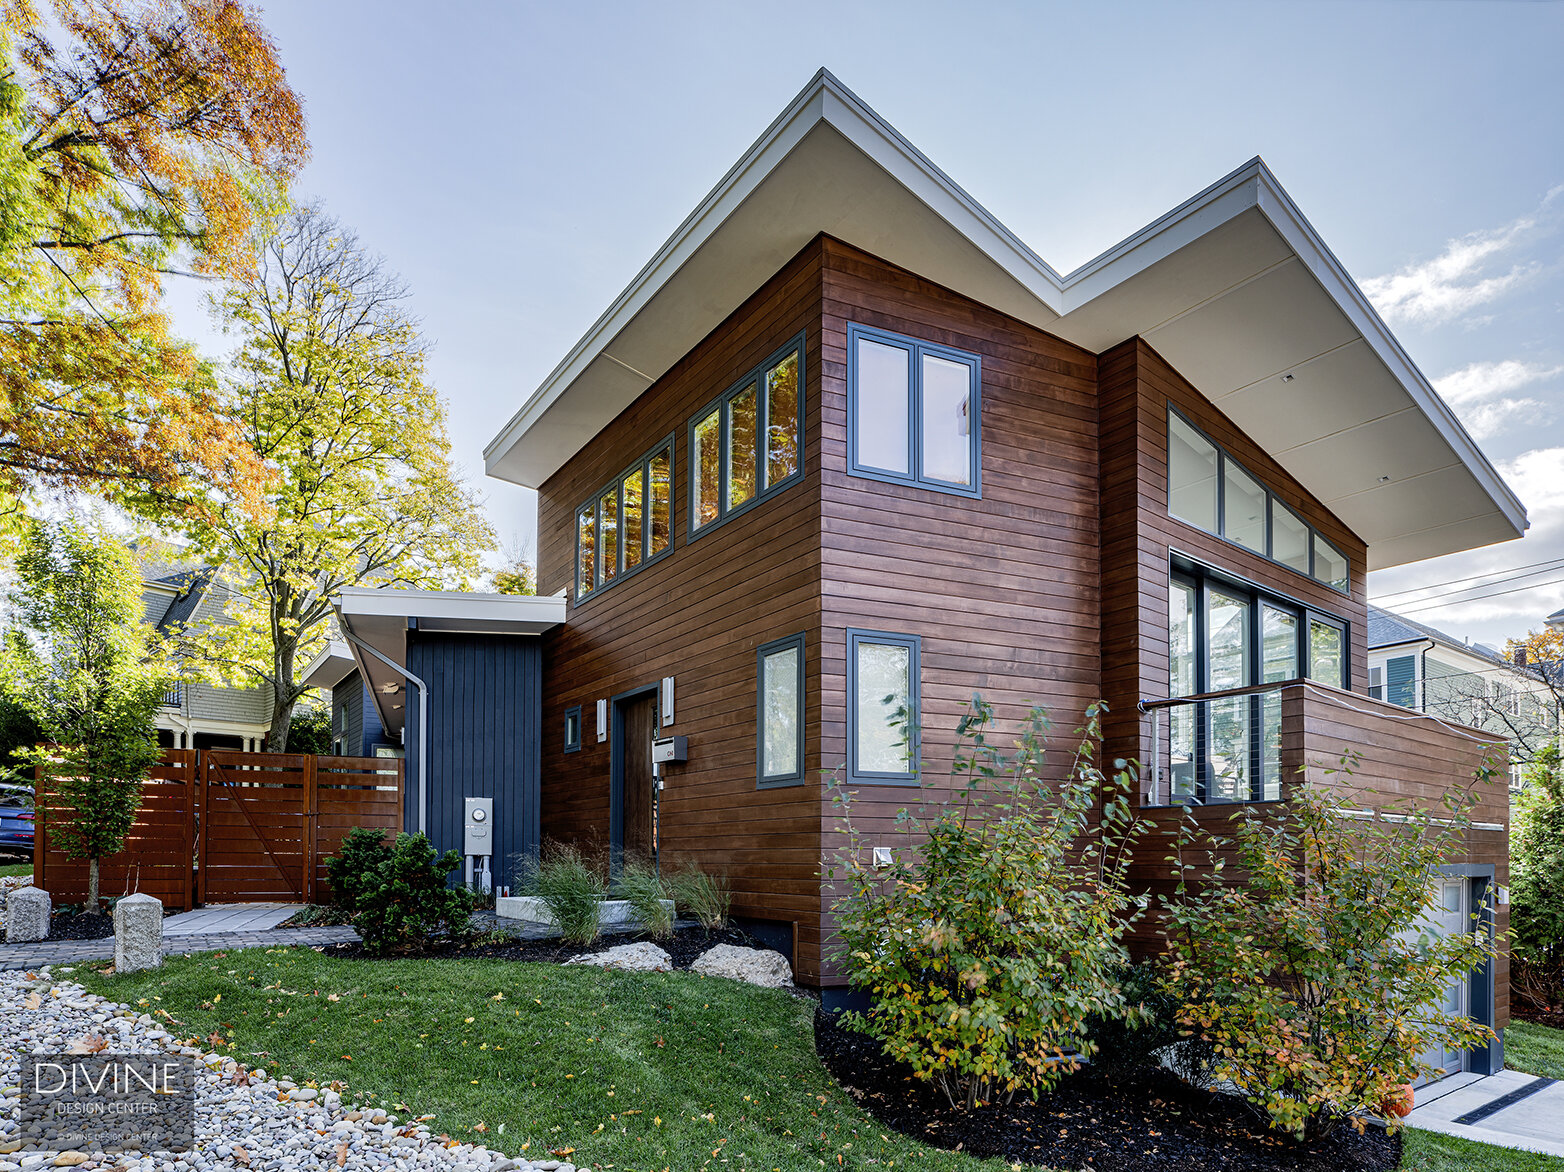  Contemporary home exterior with modern dark wood siding, black window frames, and a flat, architectural corrugated roof is surrounded by a large green lawn and healthy shrubbery.  